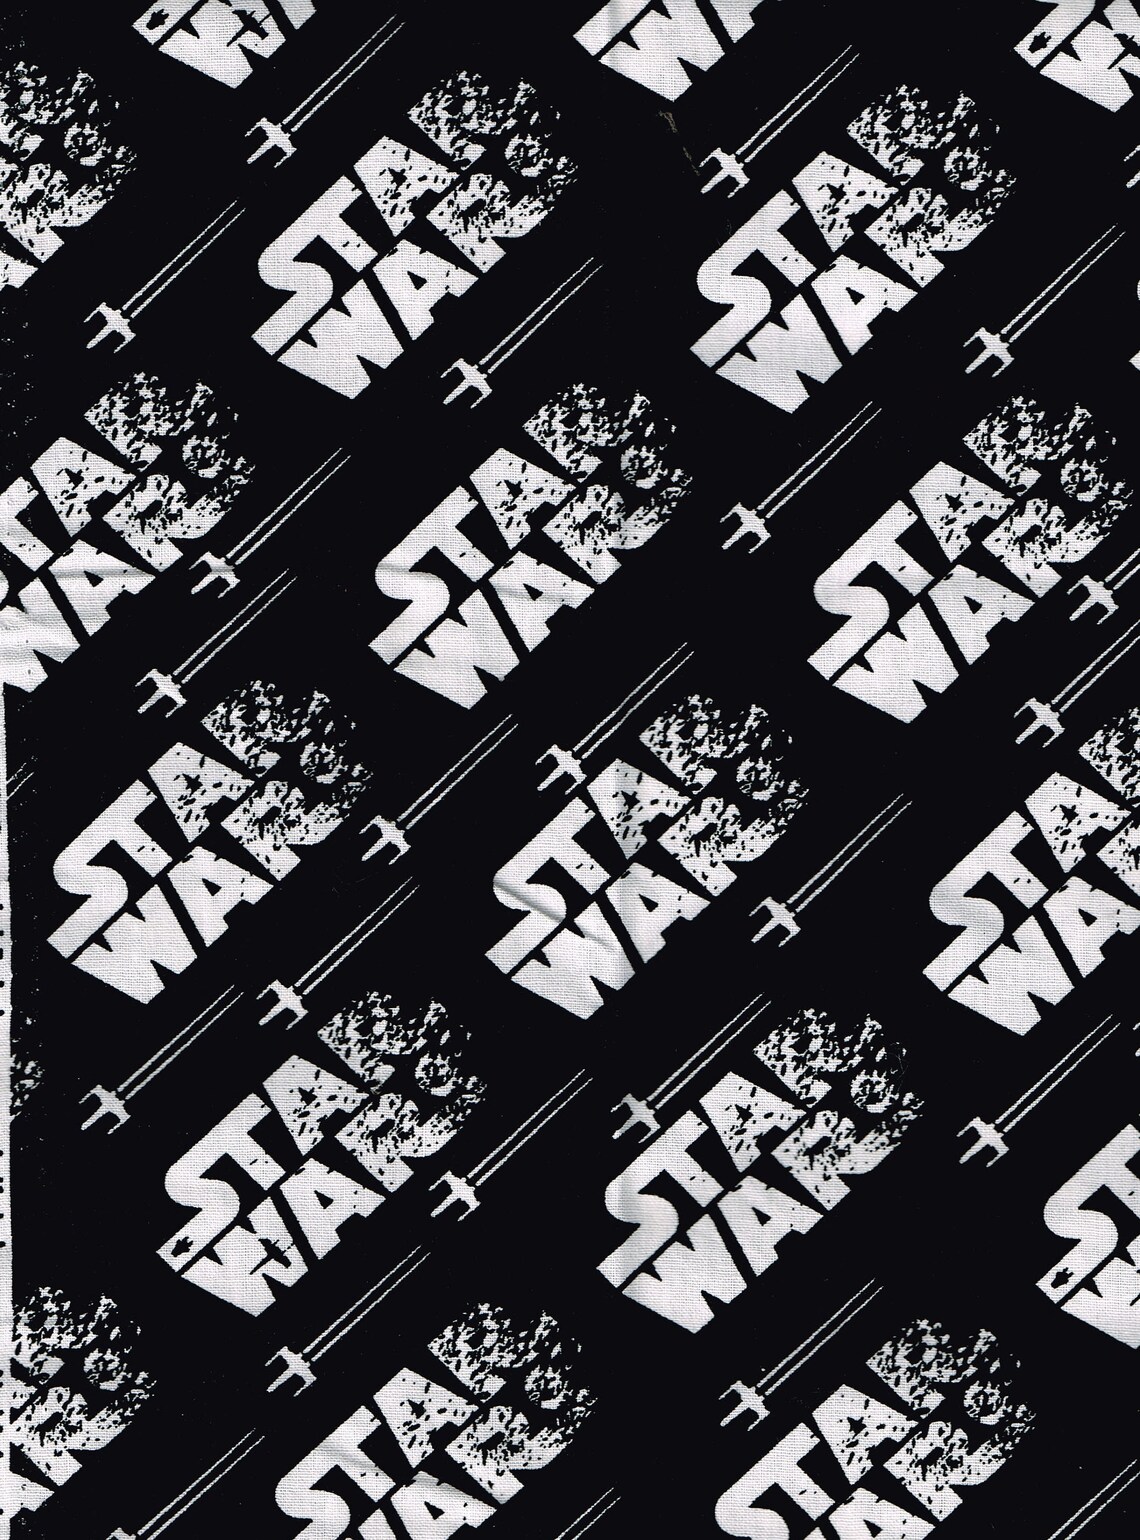 Star Wars Fabric Black and White Logo Material 100% Cotton | Etsy